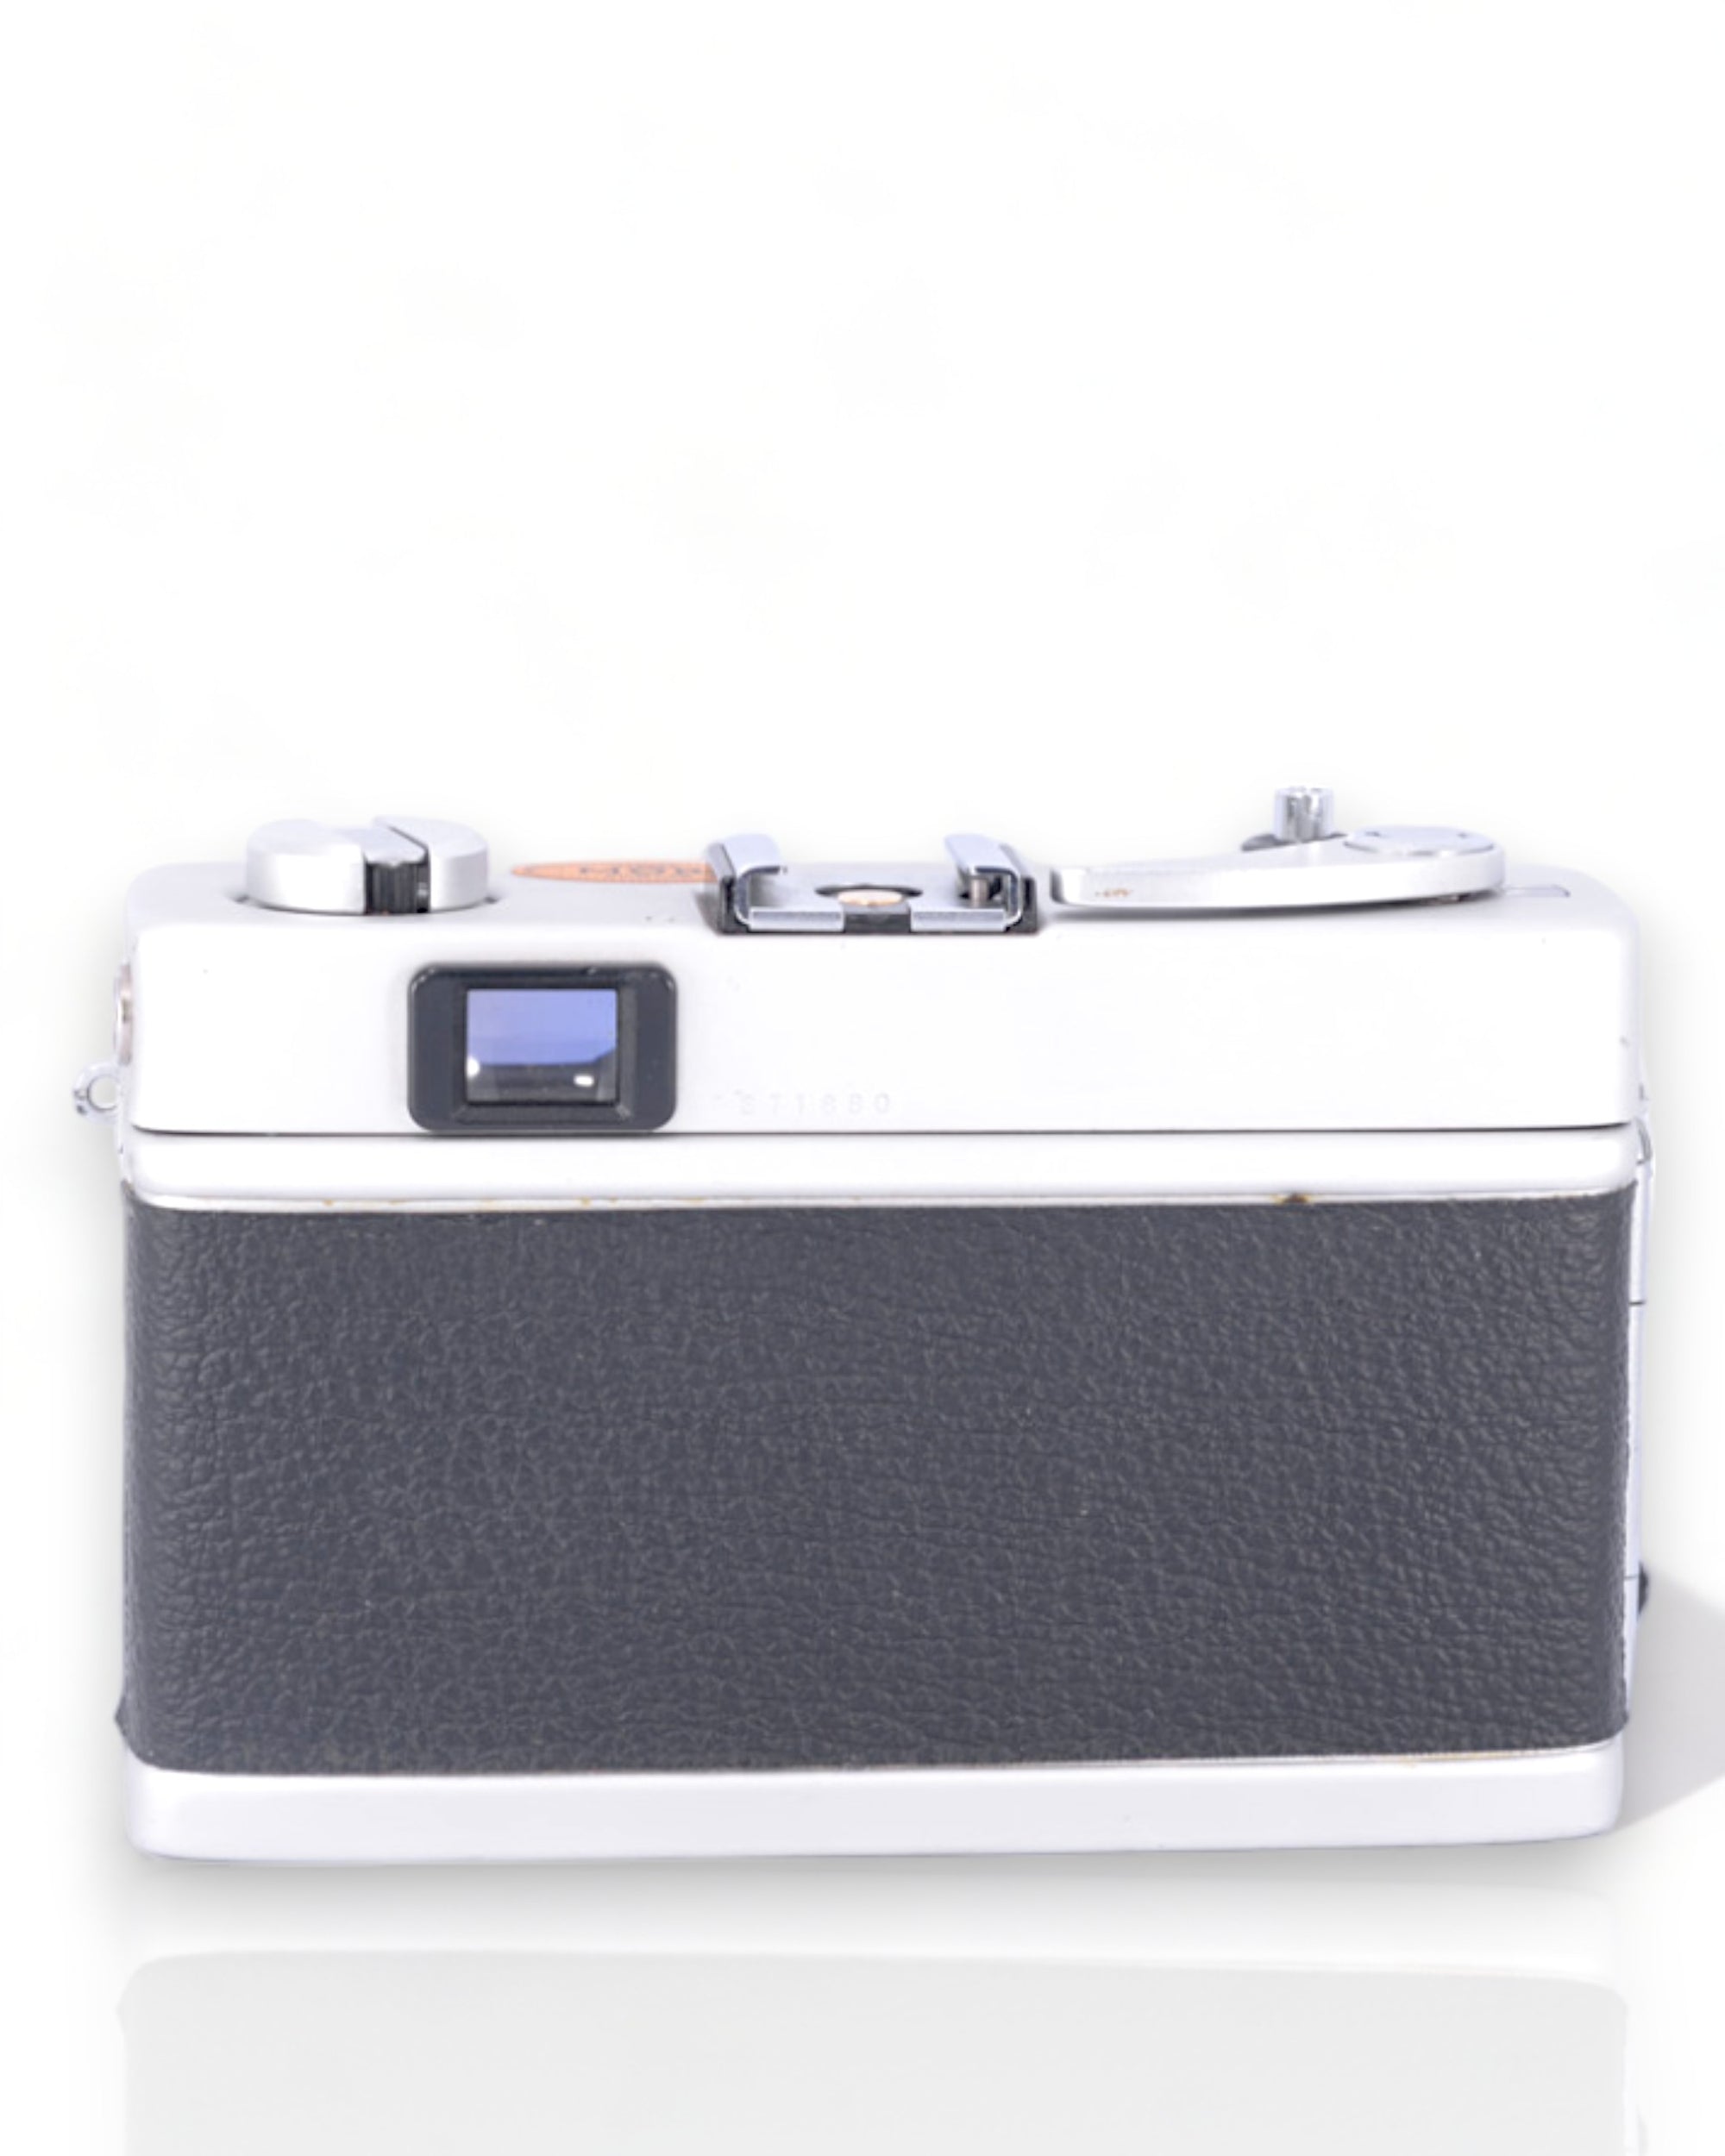 Konica C35 Automatic 35mm rangefinder film camera with 38mm f2.8 lens